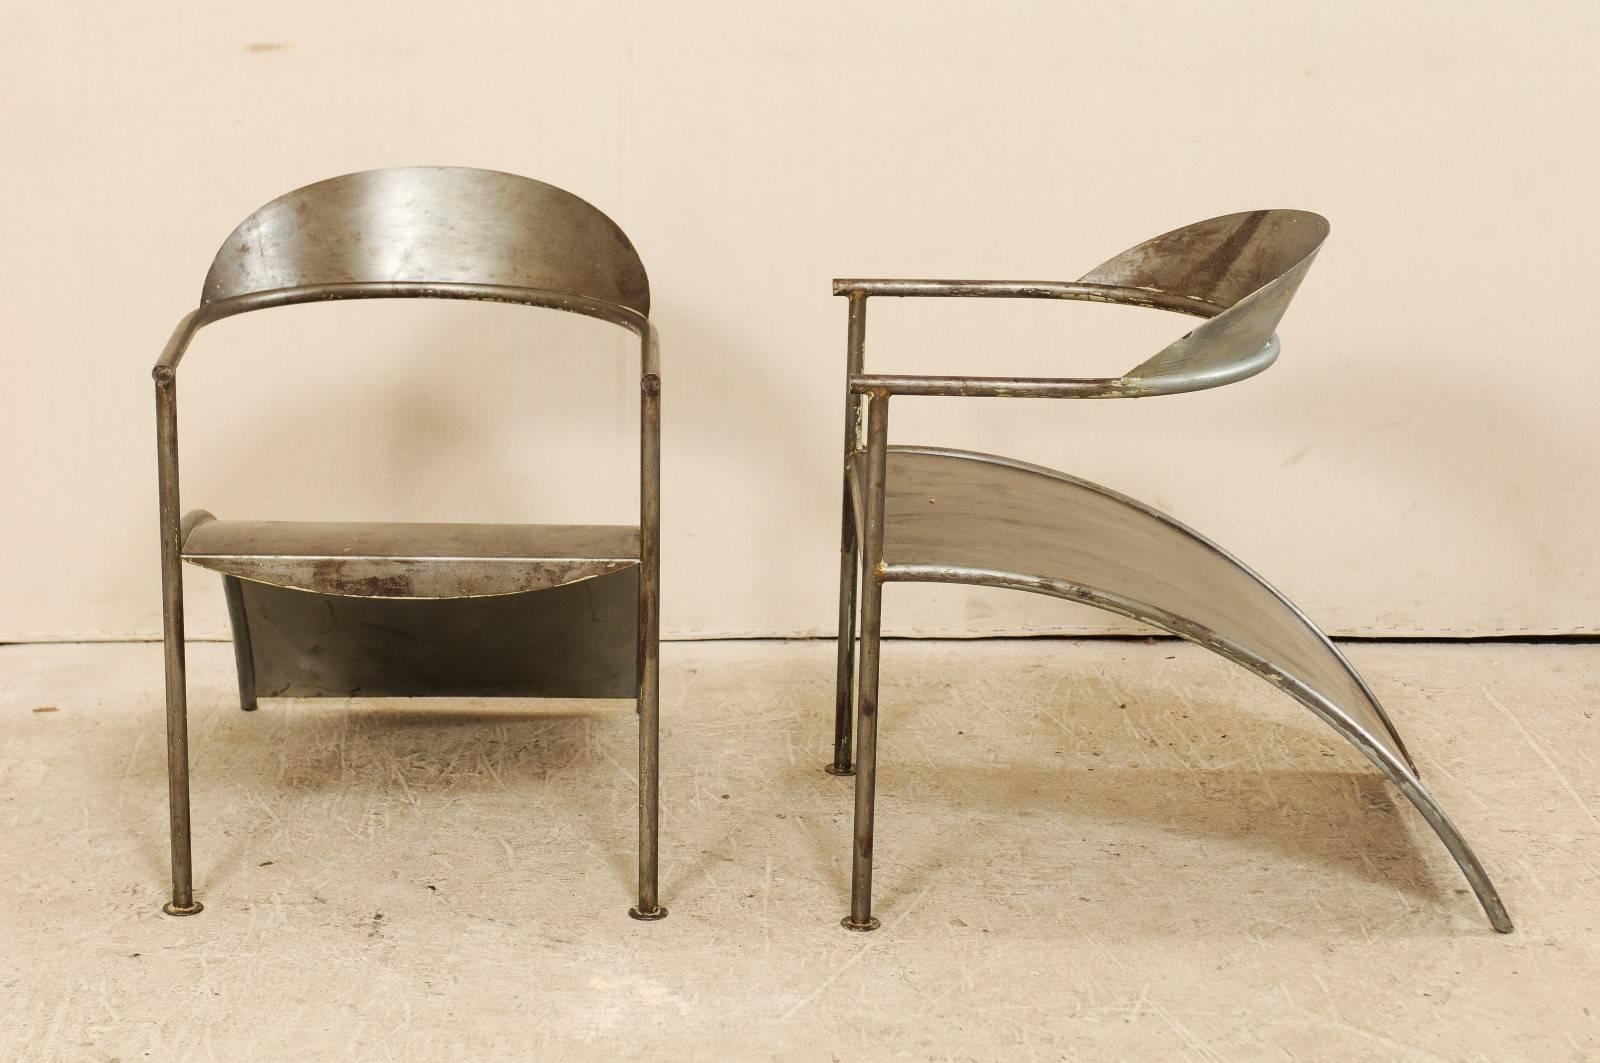 Pair of French Sleek & Modern Metal Arm Chairs by Designer Philippe Starck 1